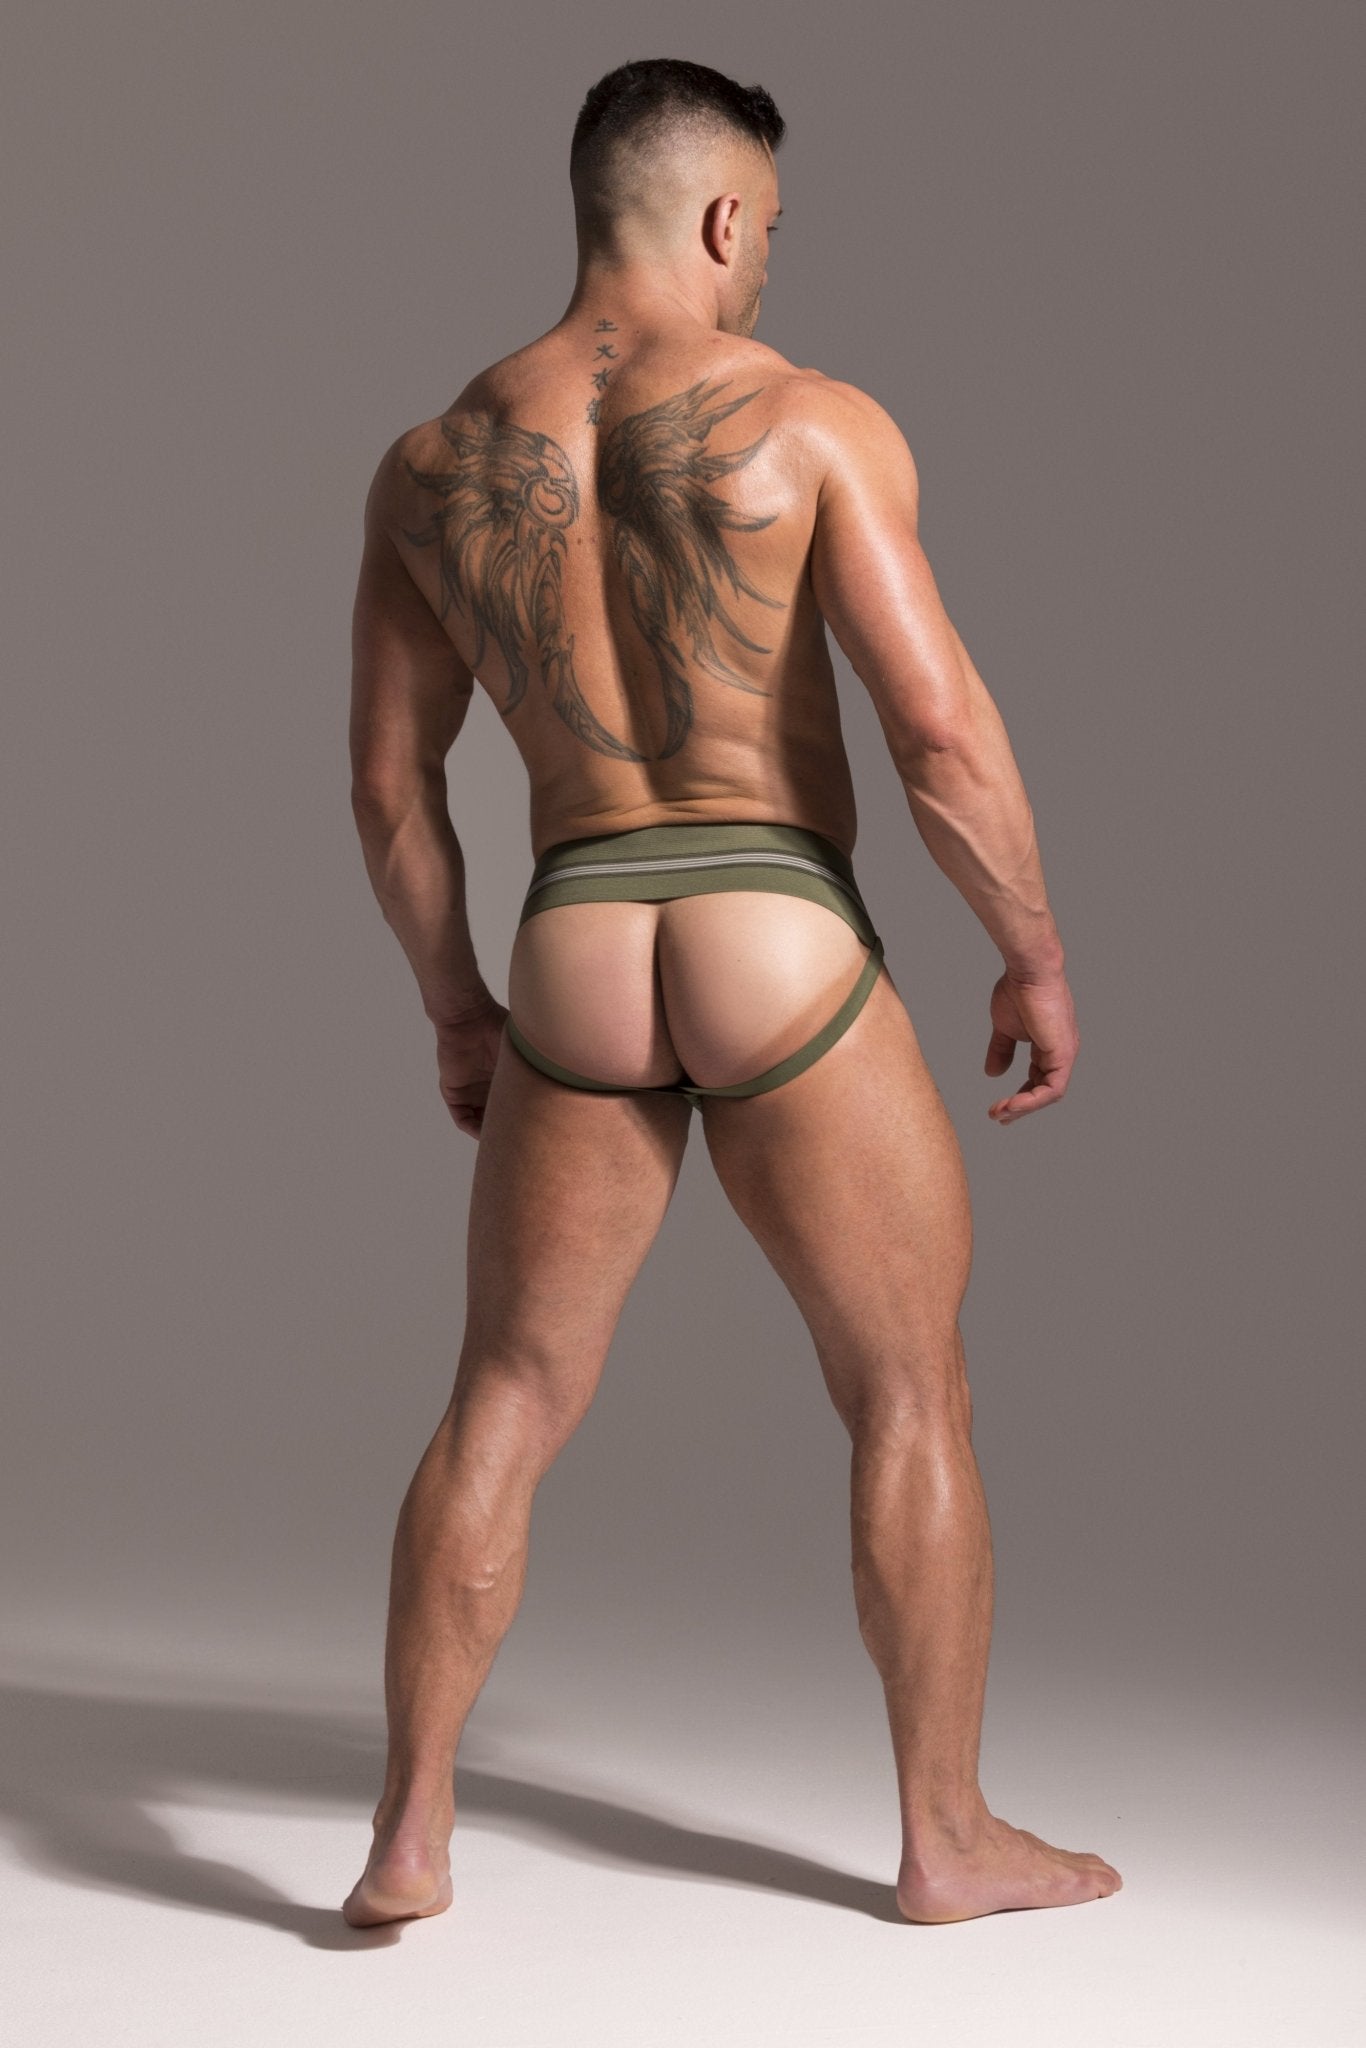 GYM Limited Edition Old School 2.0 Jockstrap with 3" Waistband (1-Pack) - Jockstraps.com